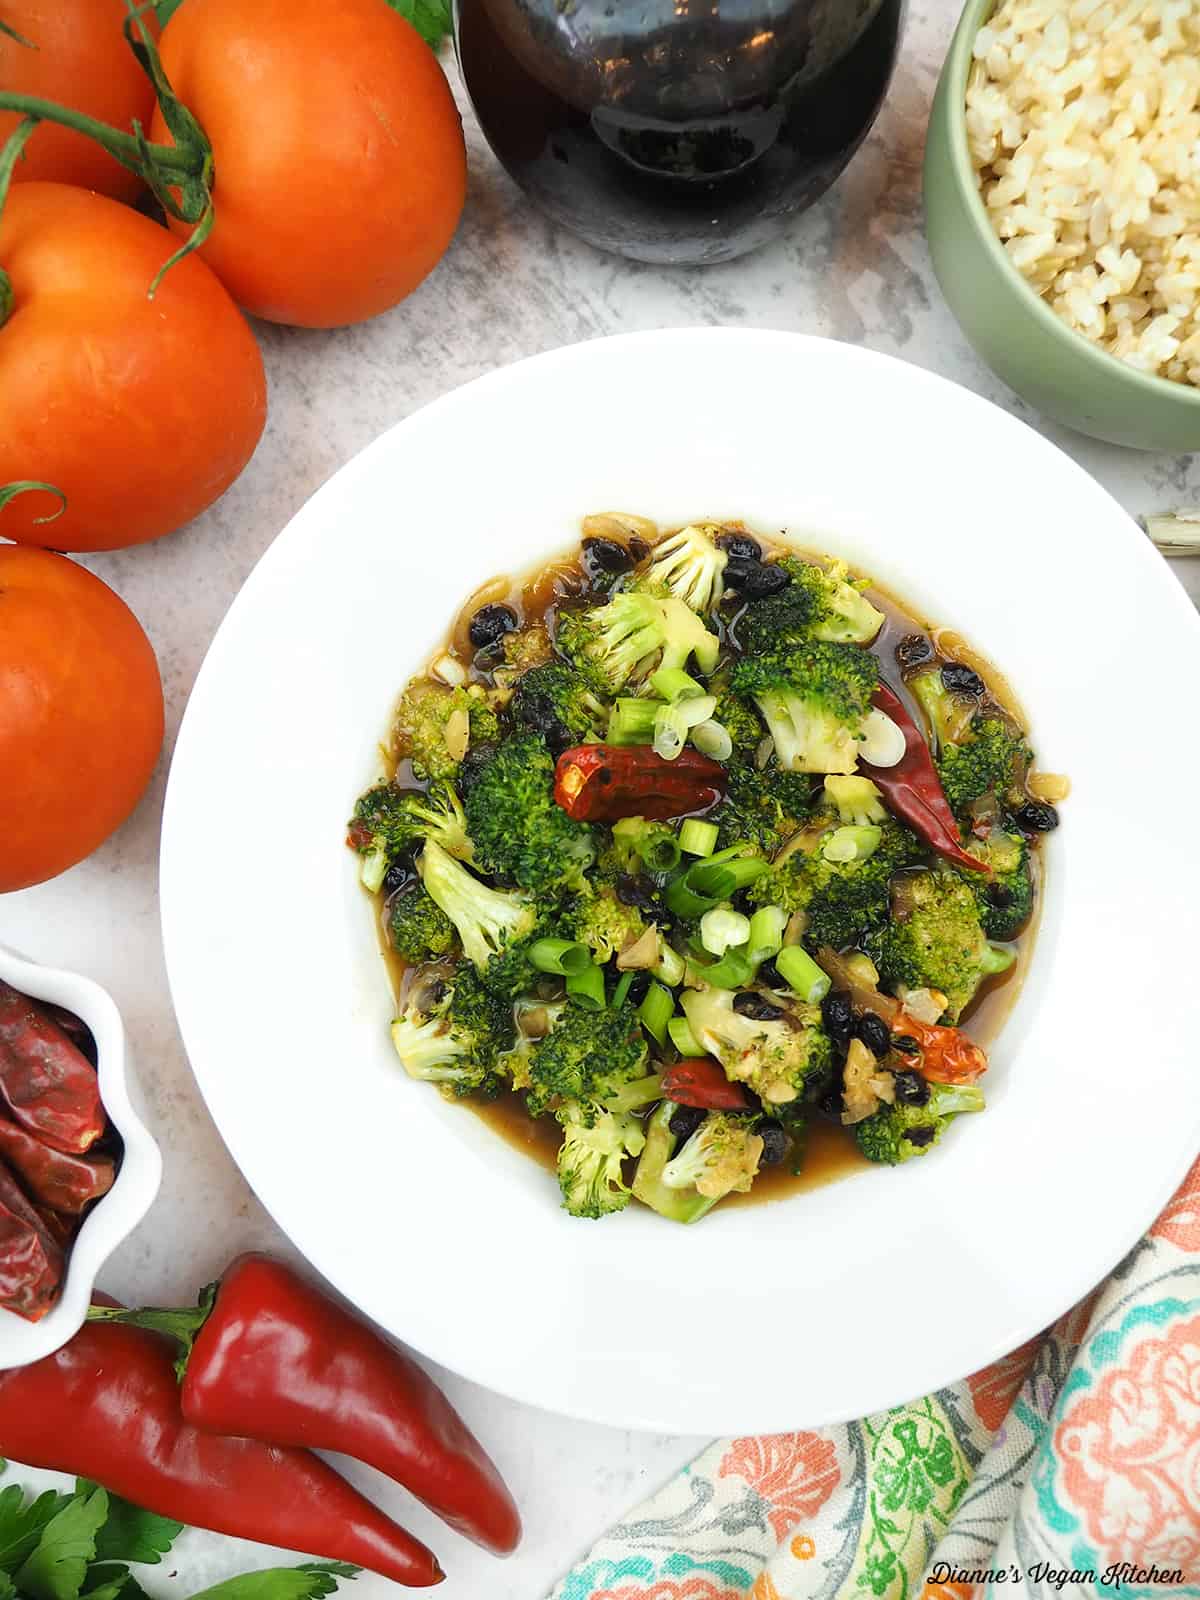 one bowl of Broccoli with Black Bean Sauce with red chilis, brown rice, tomatoes, and soy sauce